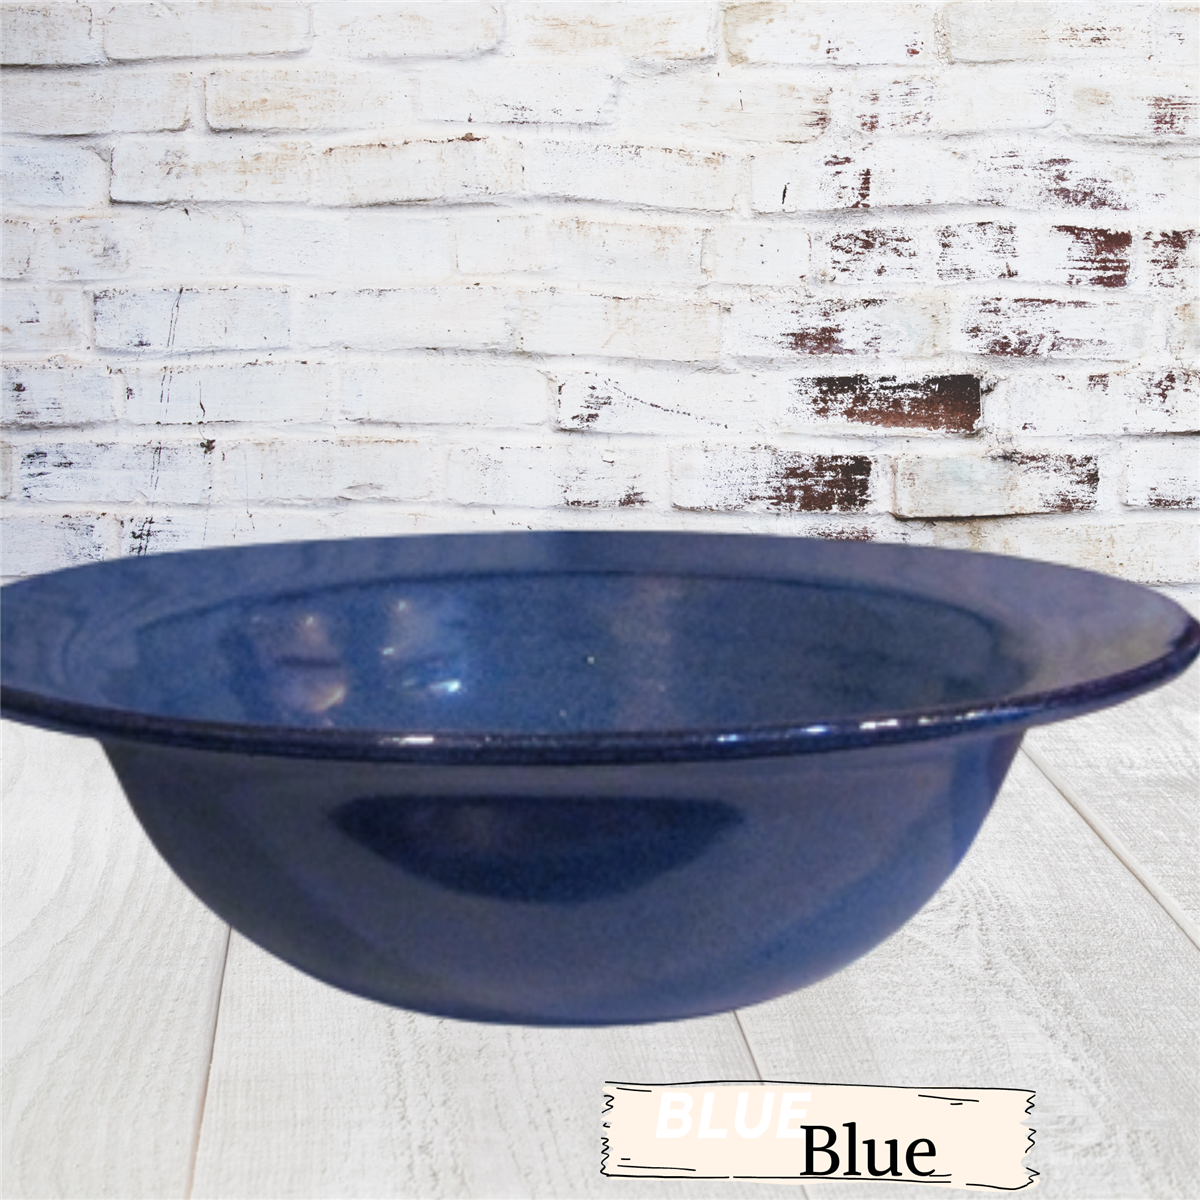 Pasta soup or salad bowl room for crackers along wide edge. Handmade pottery. Ceramic shallow dish